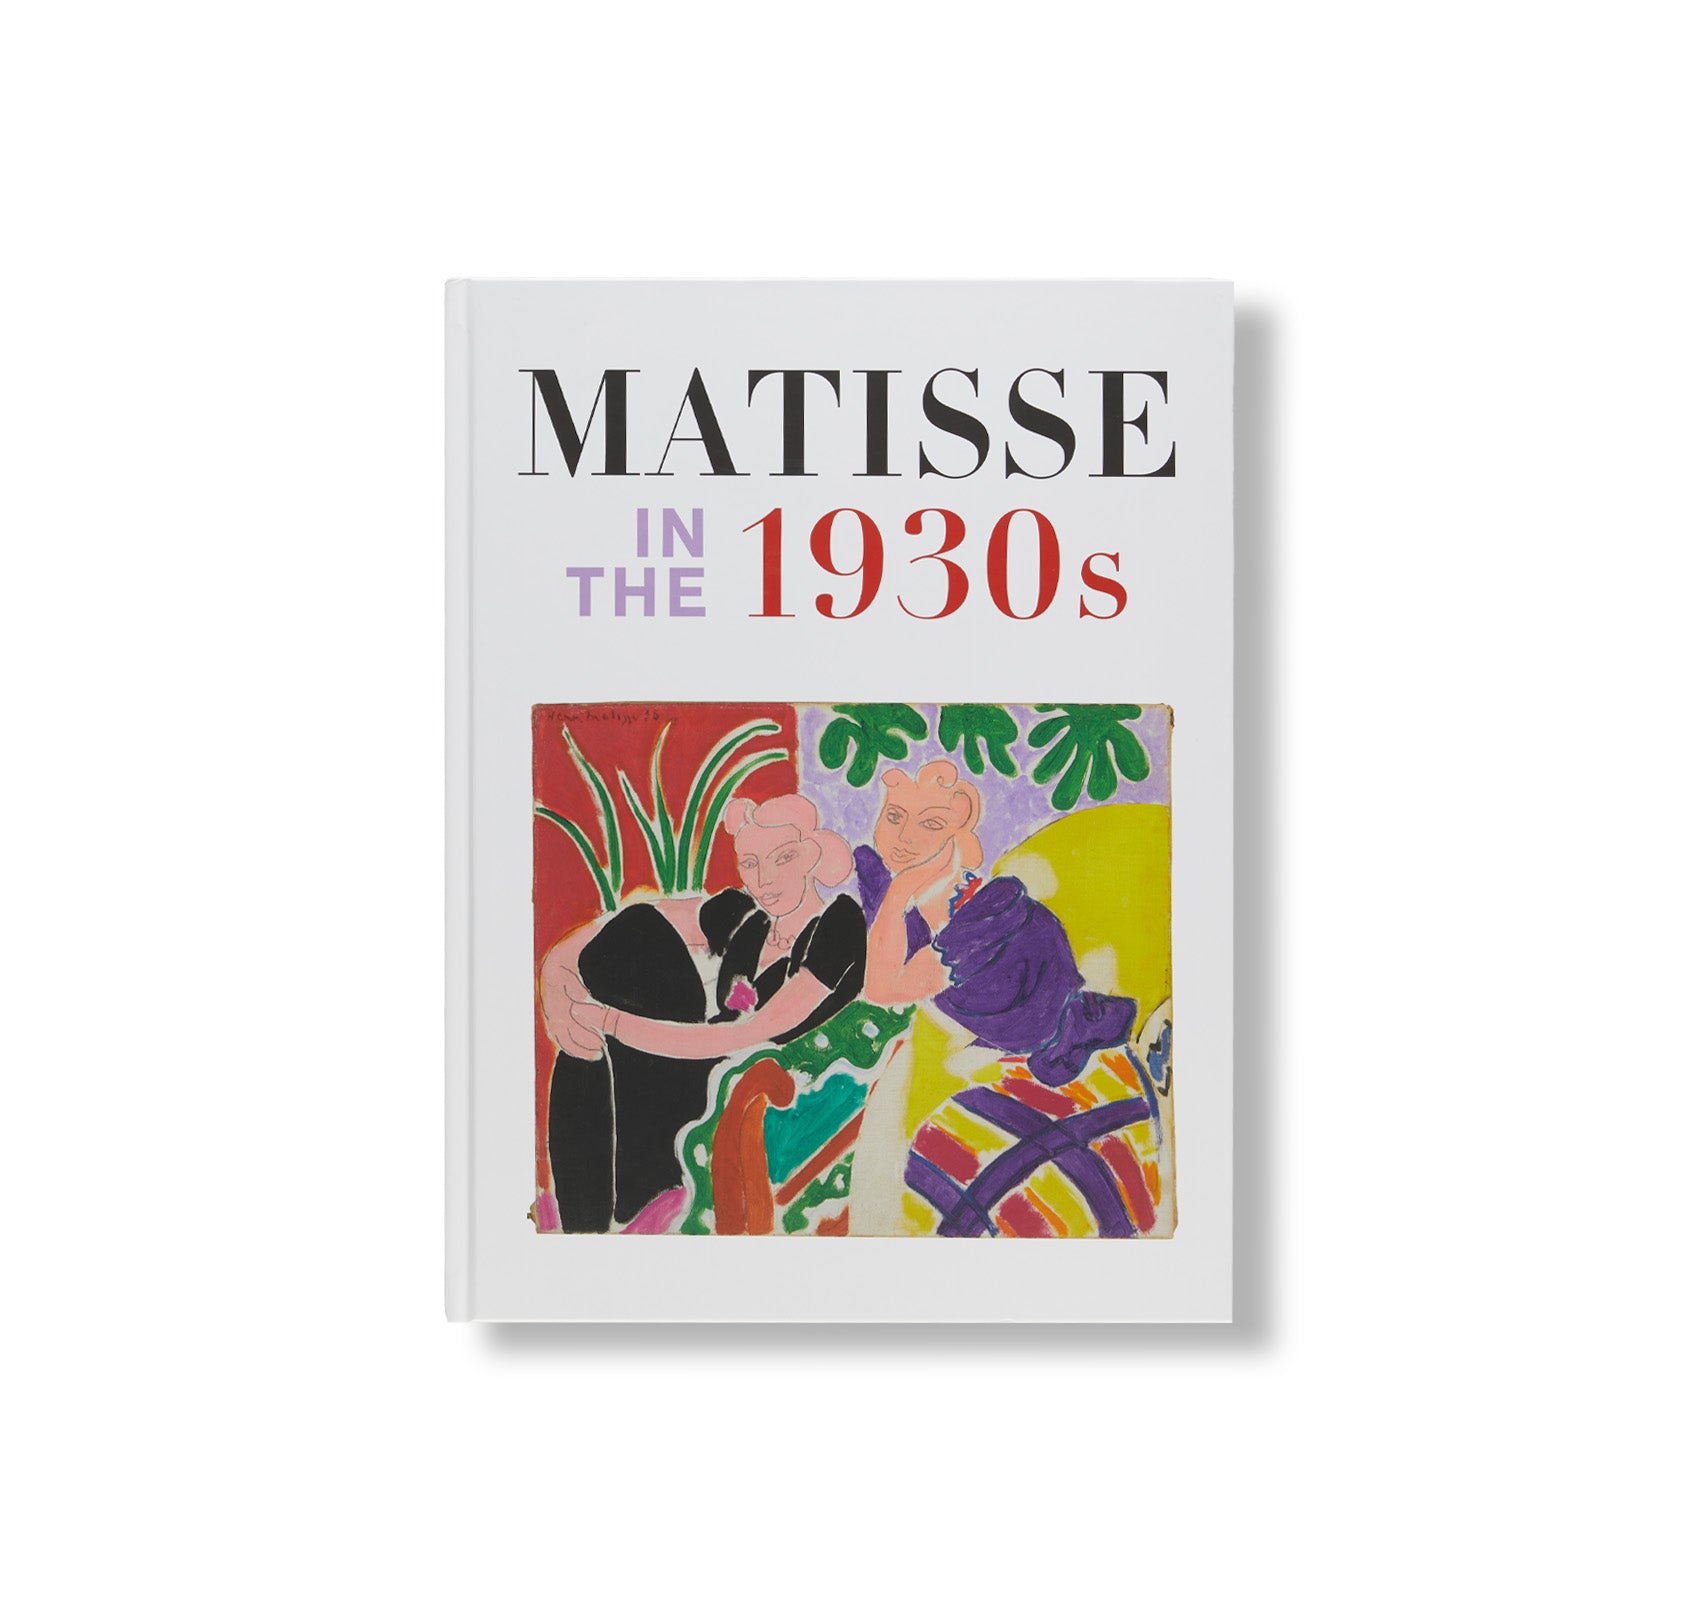 MATISSE IN THE 1930S by Henri Matisse